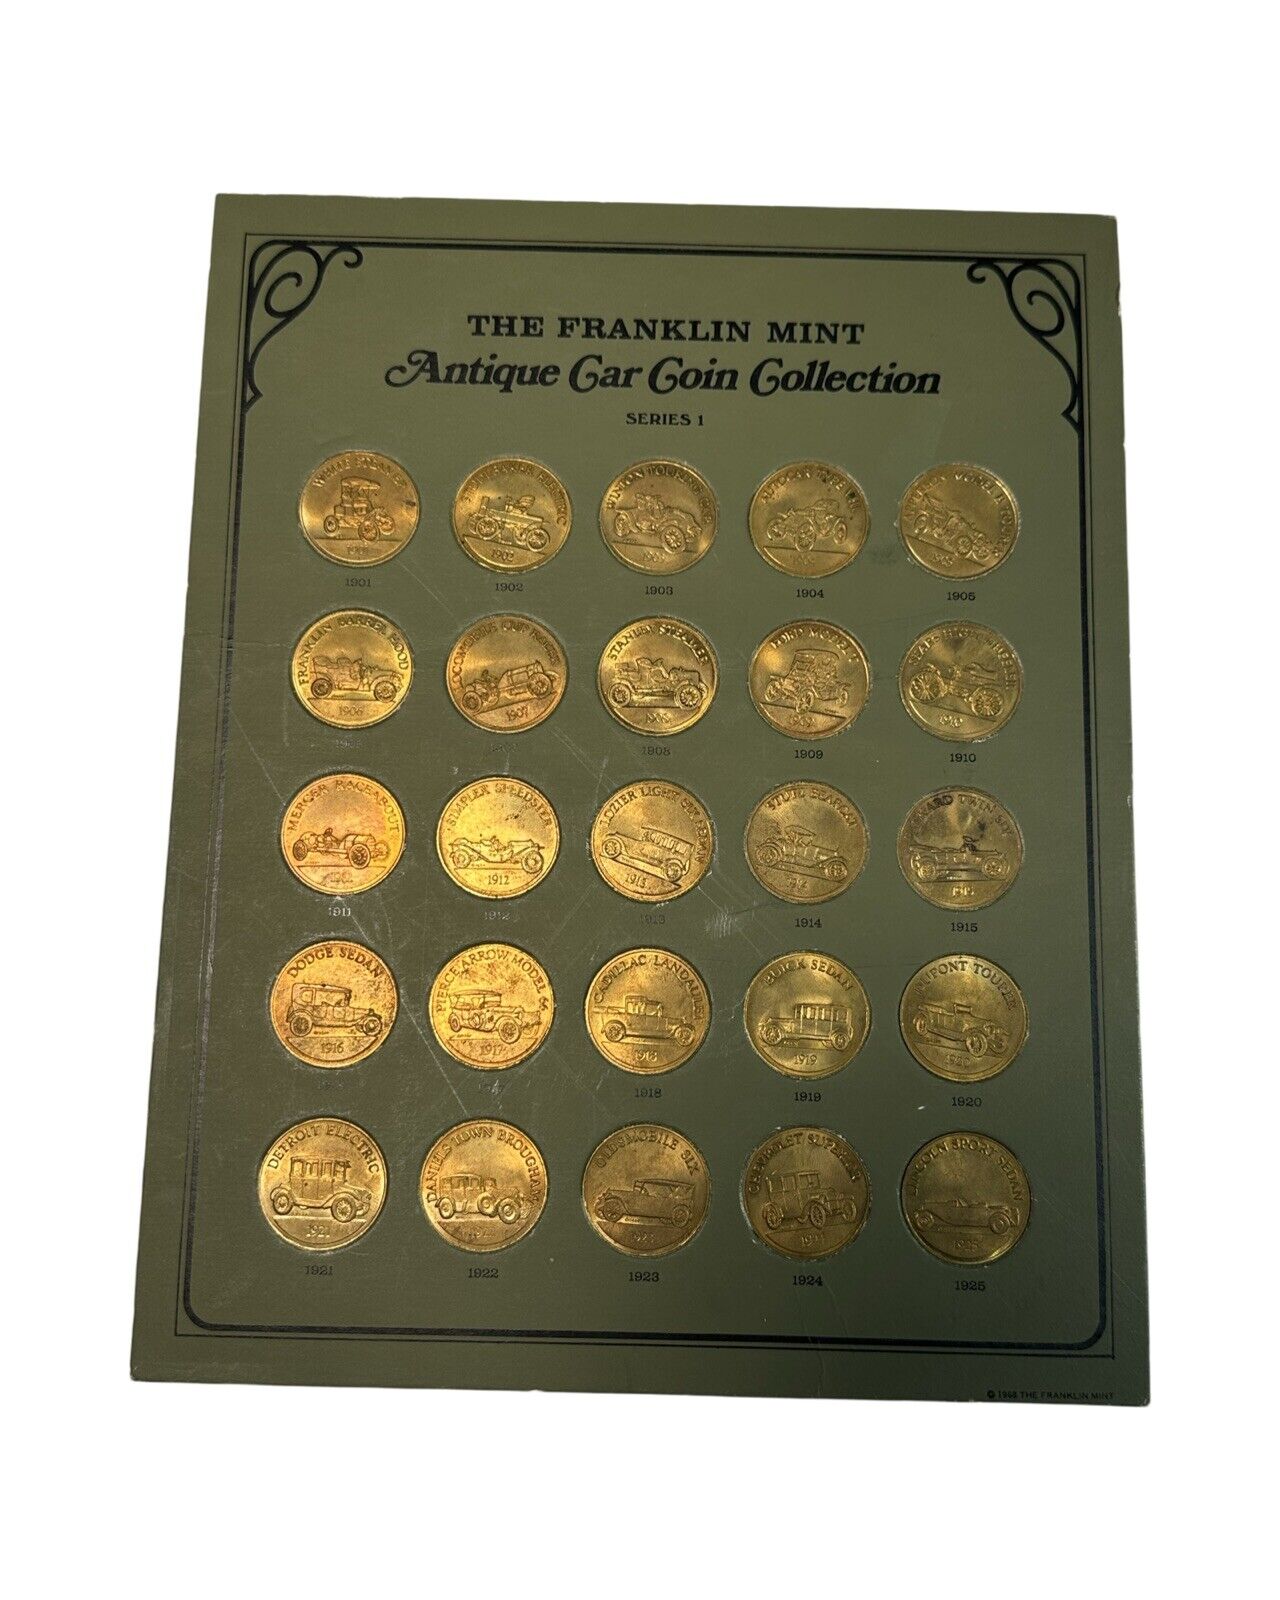 The Franklin antique car coin collection series one. Plus Book 1968